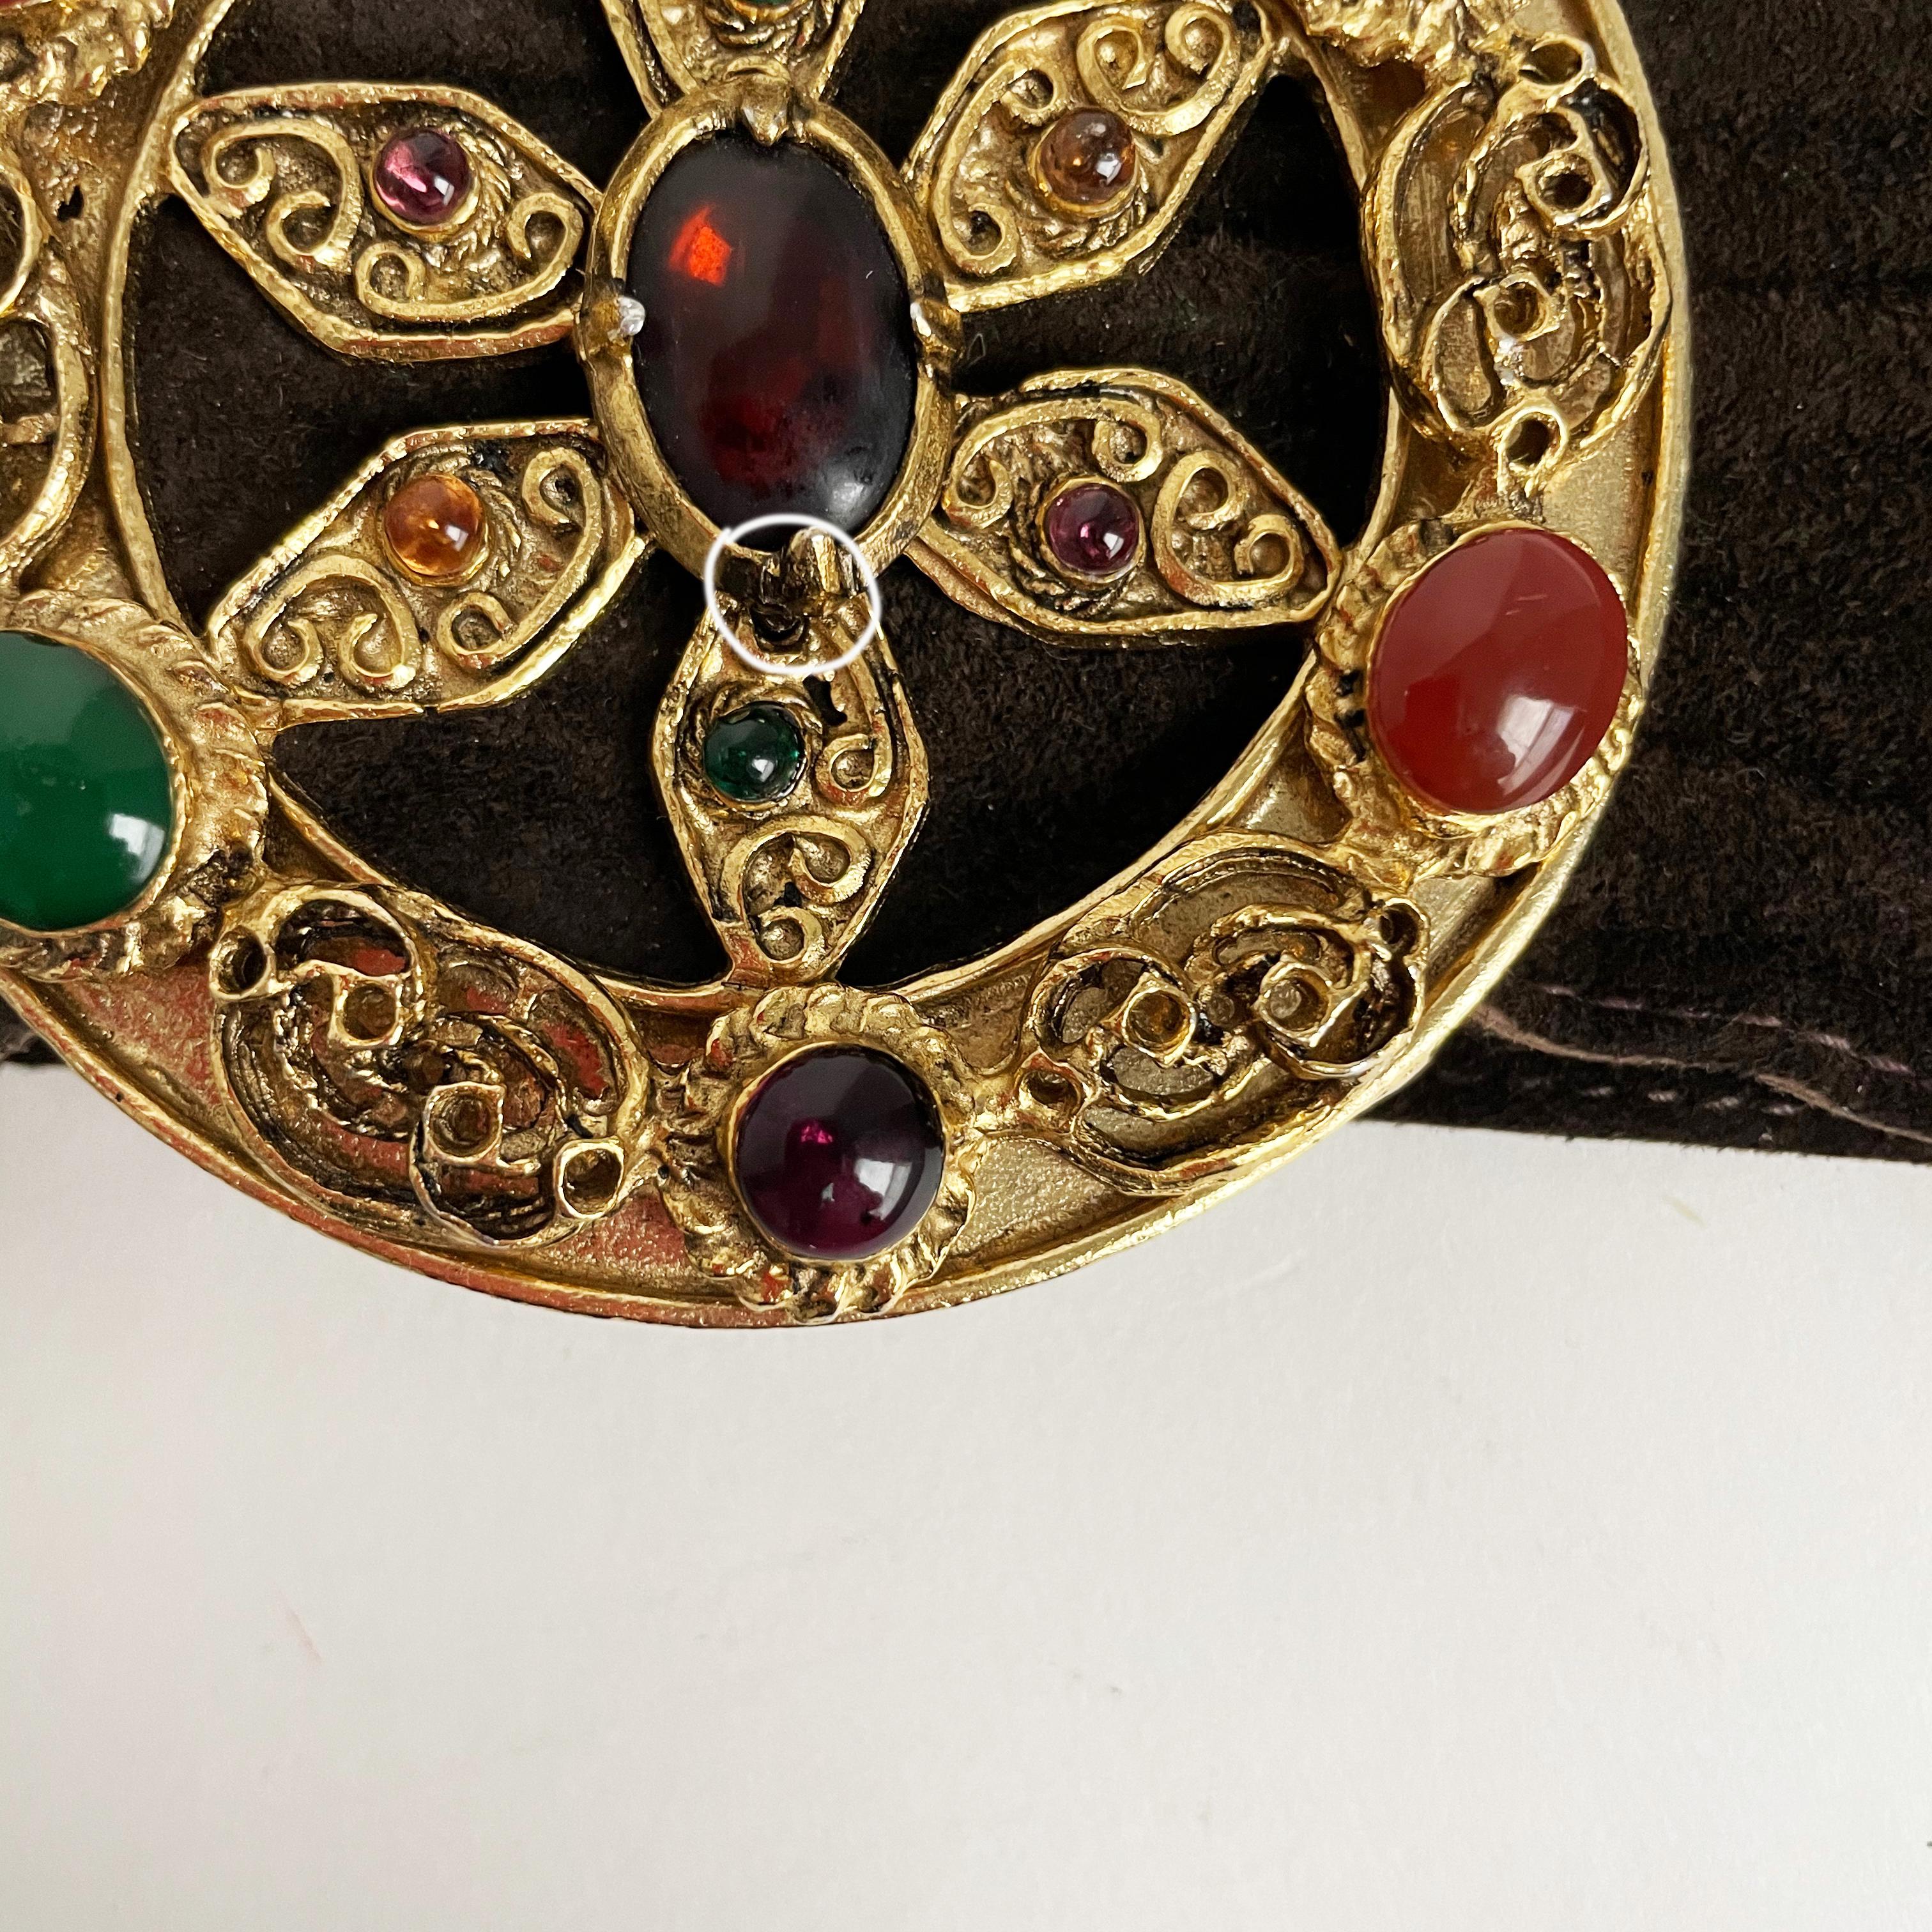 Yves Saint Laurent Belt Colorful Glass Cabochons Buckle Suede Leather 70s S/M 13